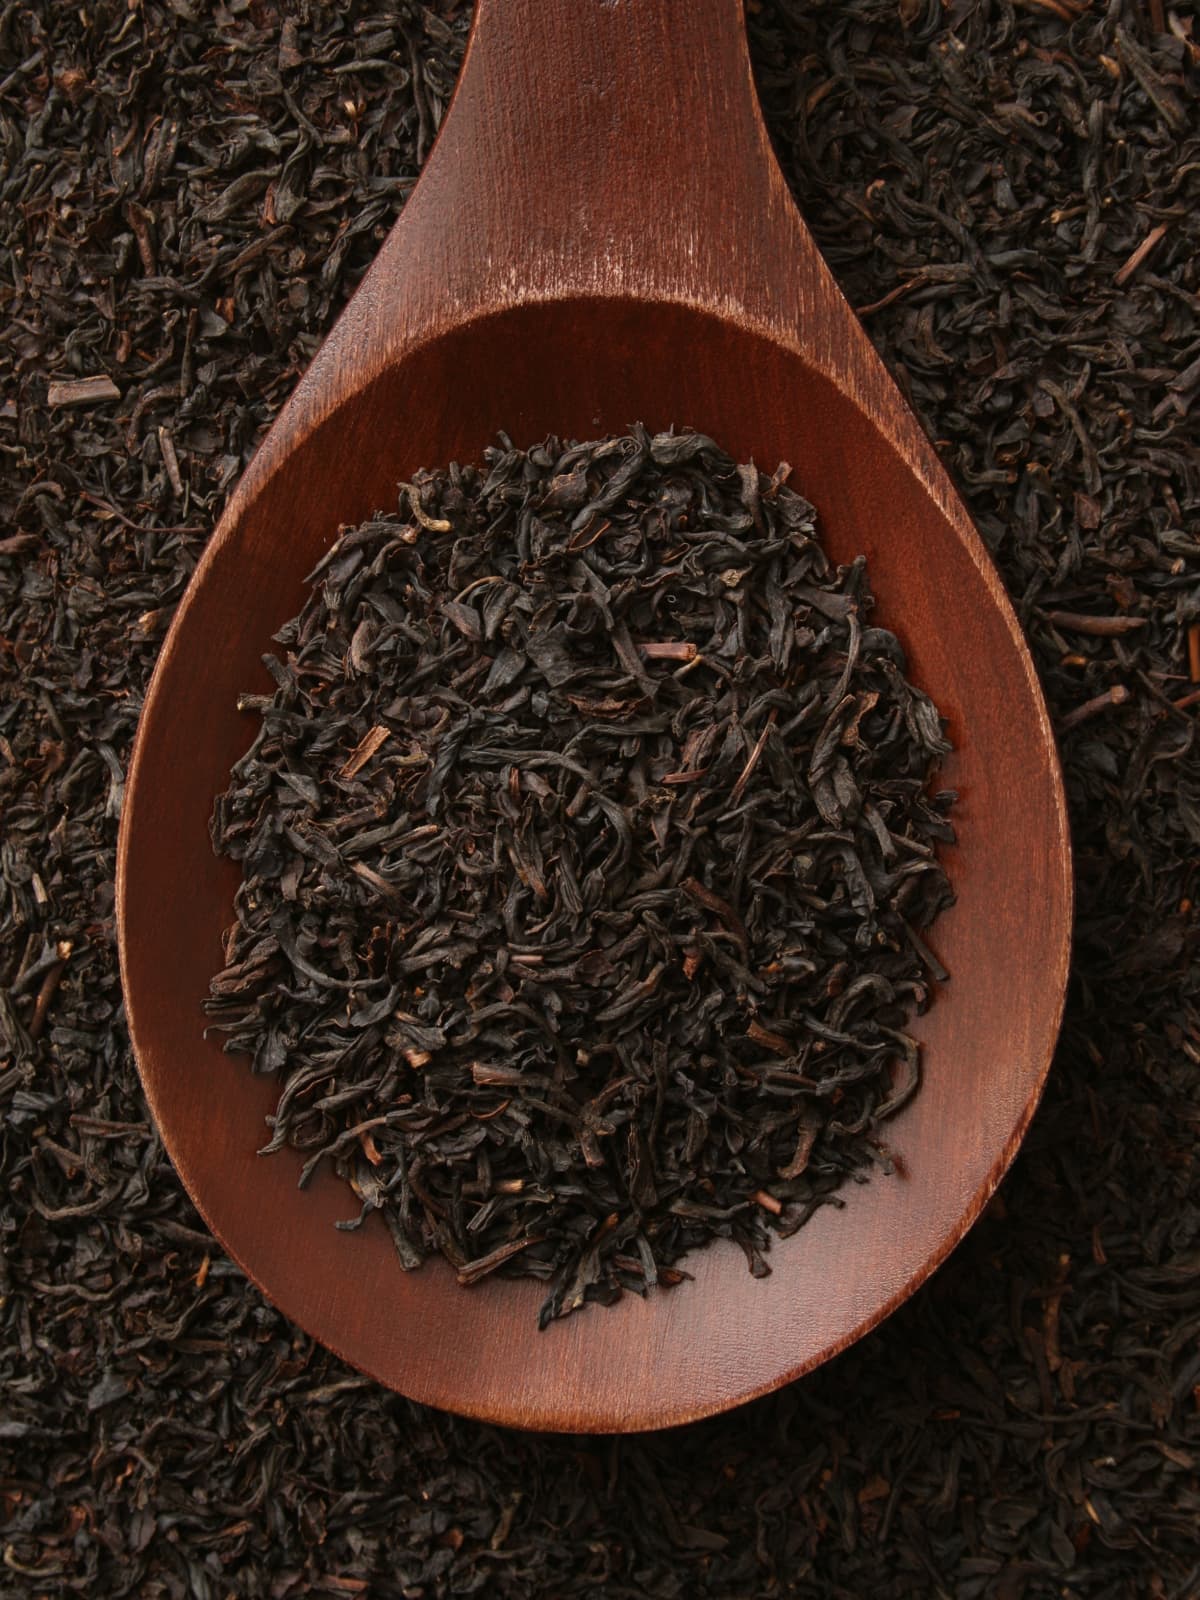 Spoonful of tea blend with rose buds, hibiscus leaves, echinacea flowers and cinnamon sticks on black rustic background